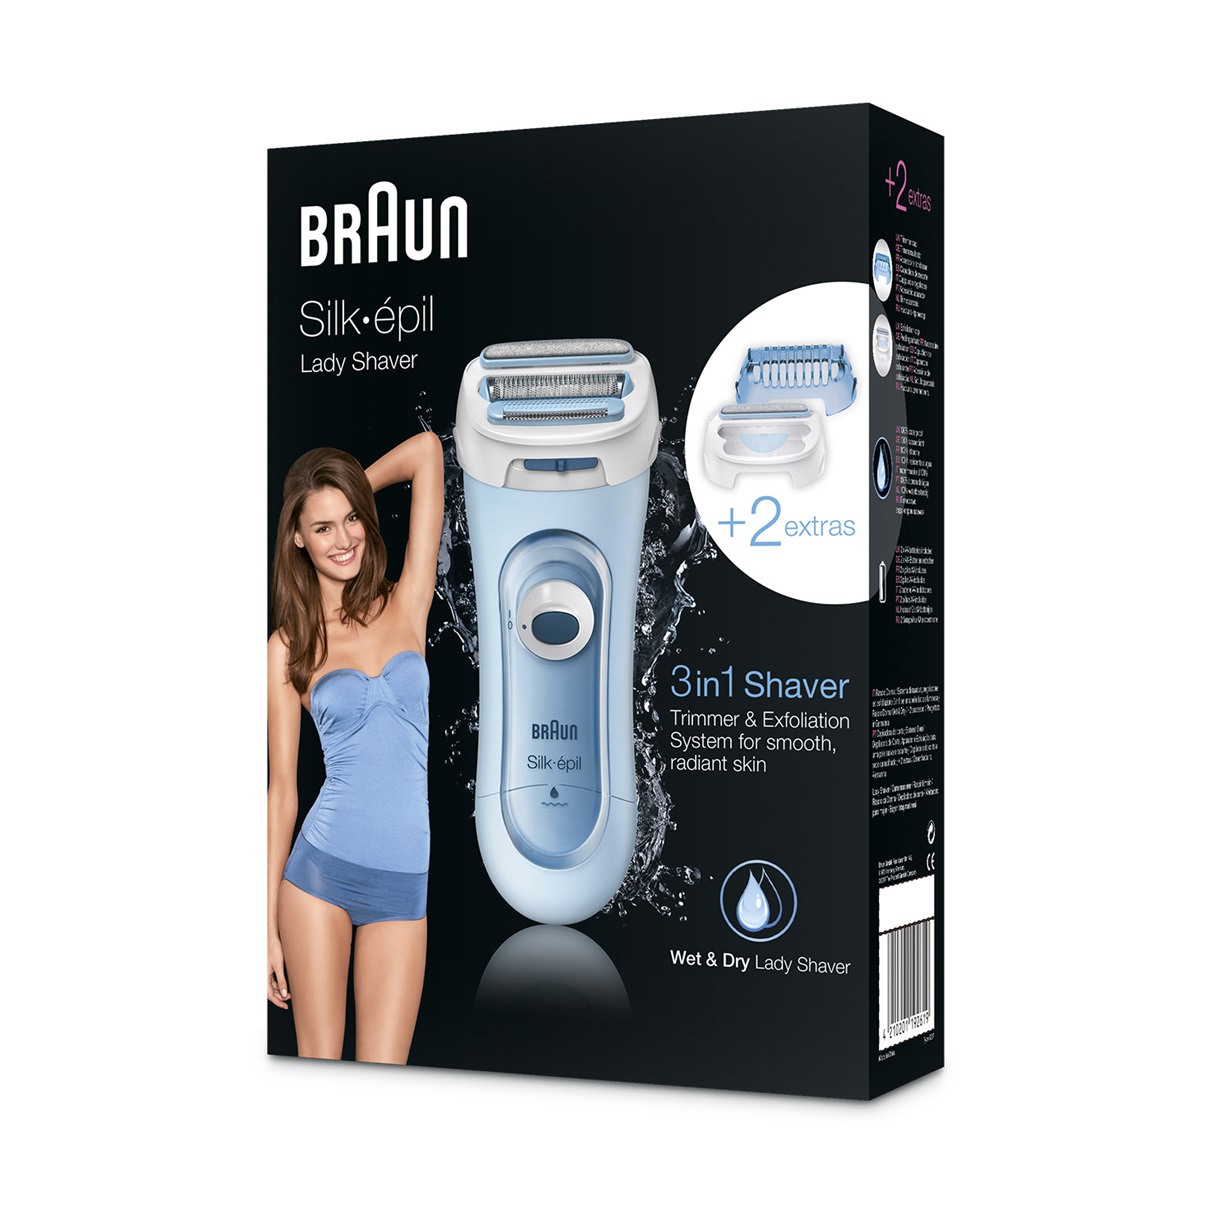 Braun Lady Shaver - 5160 Wet & Dry Electric Shaver for Women  - packaging